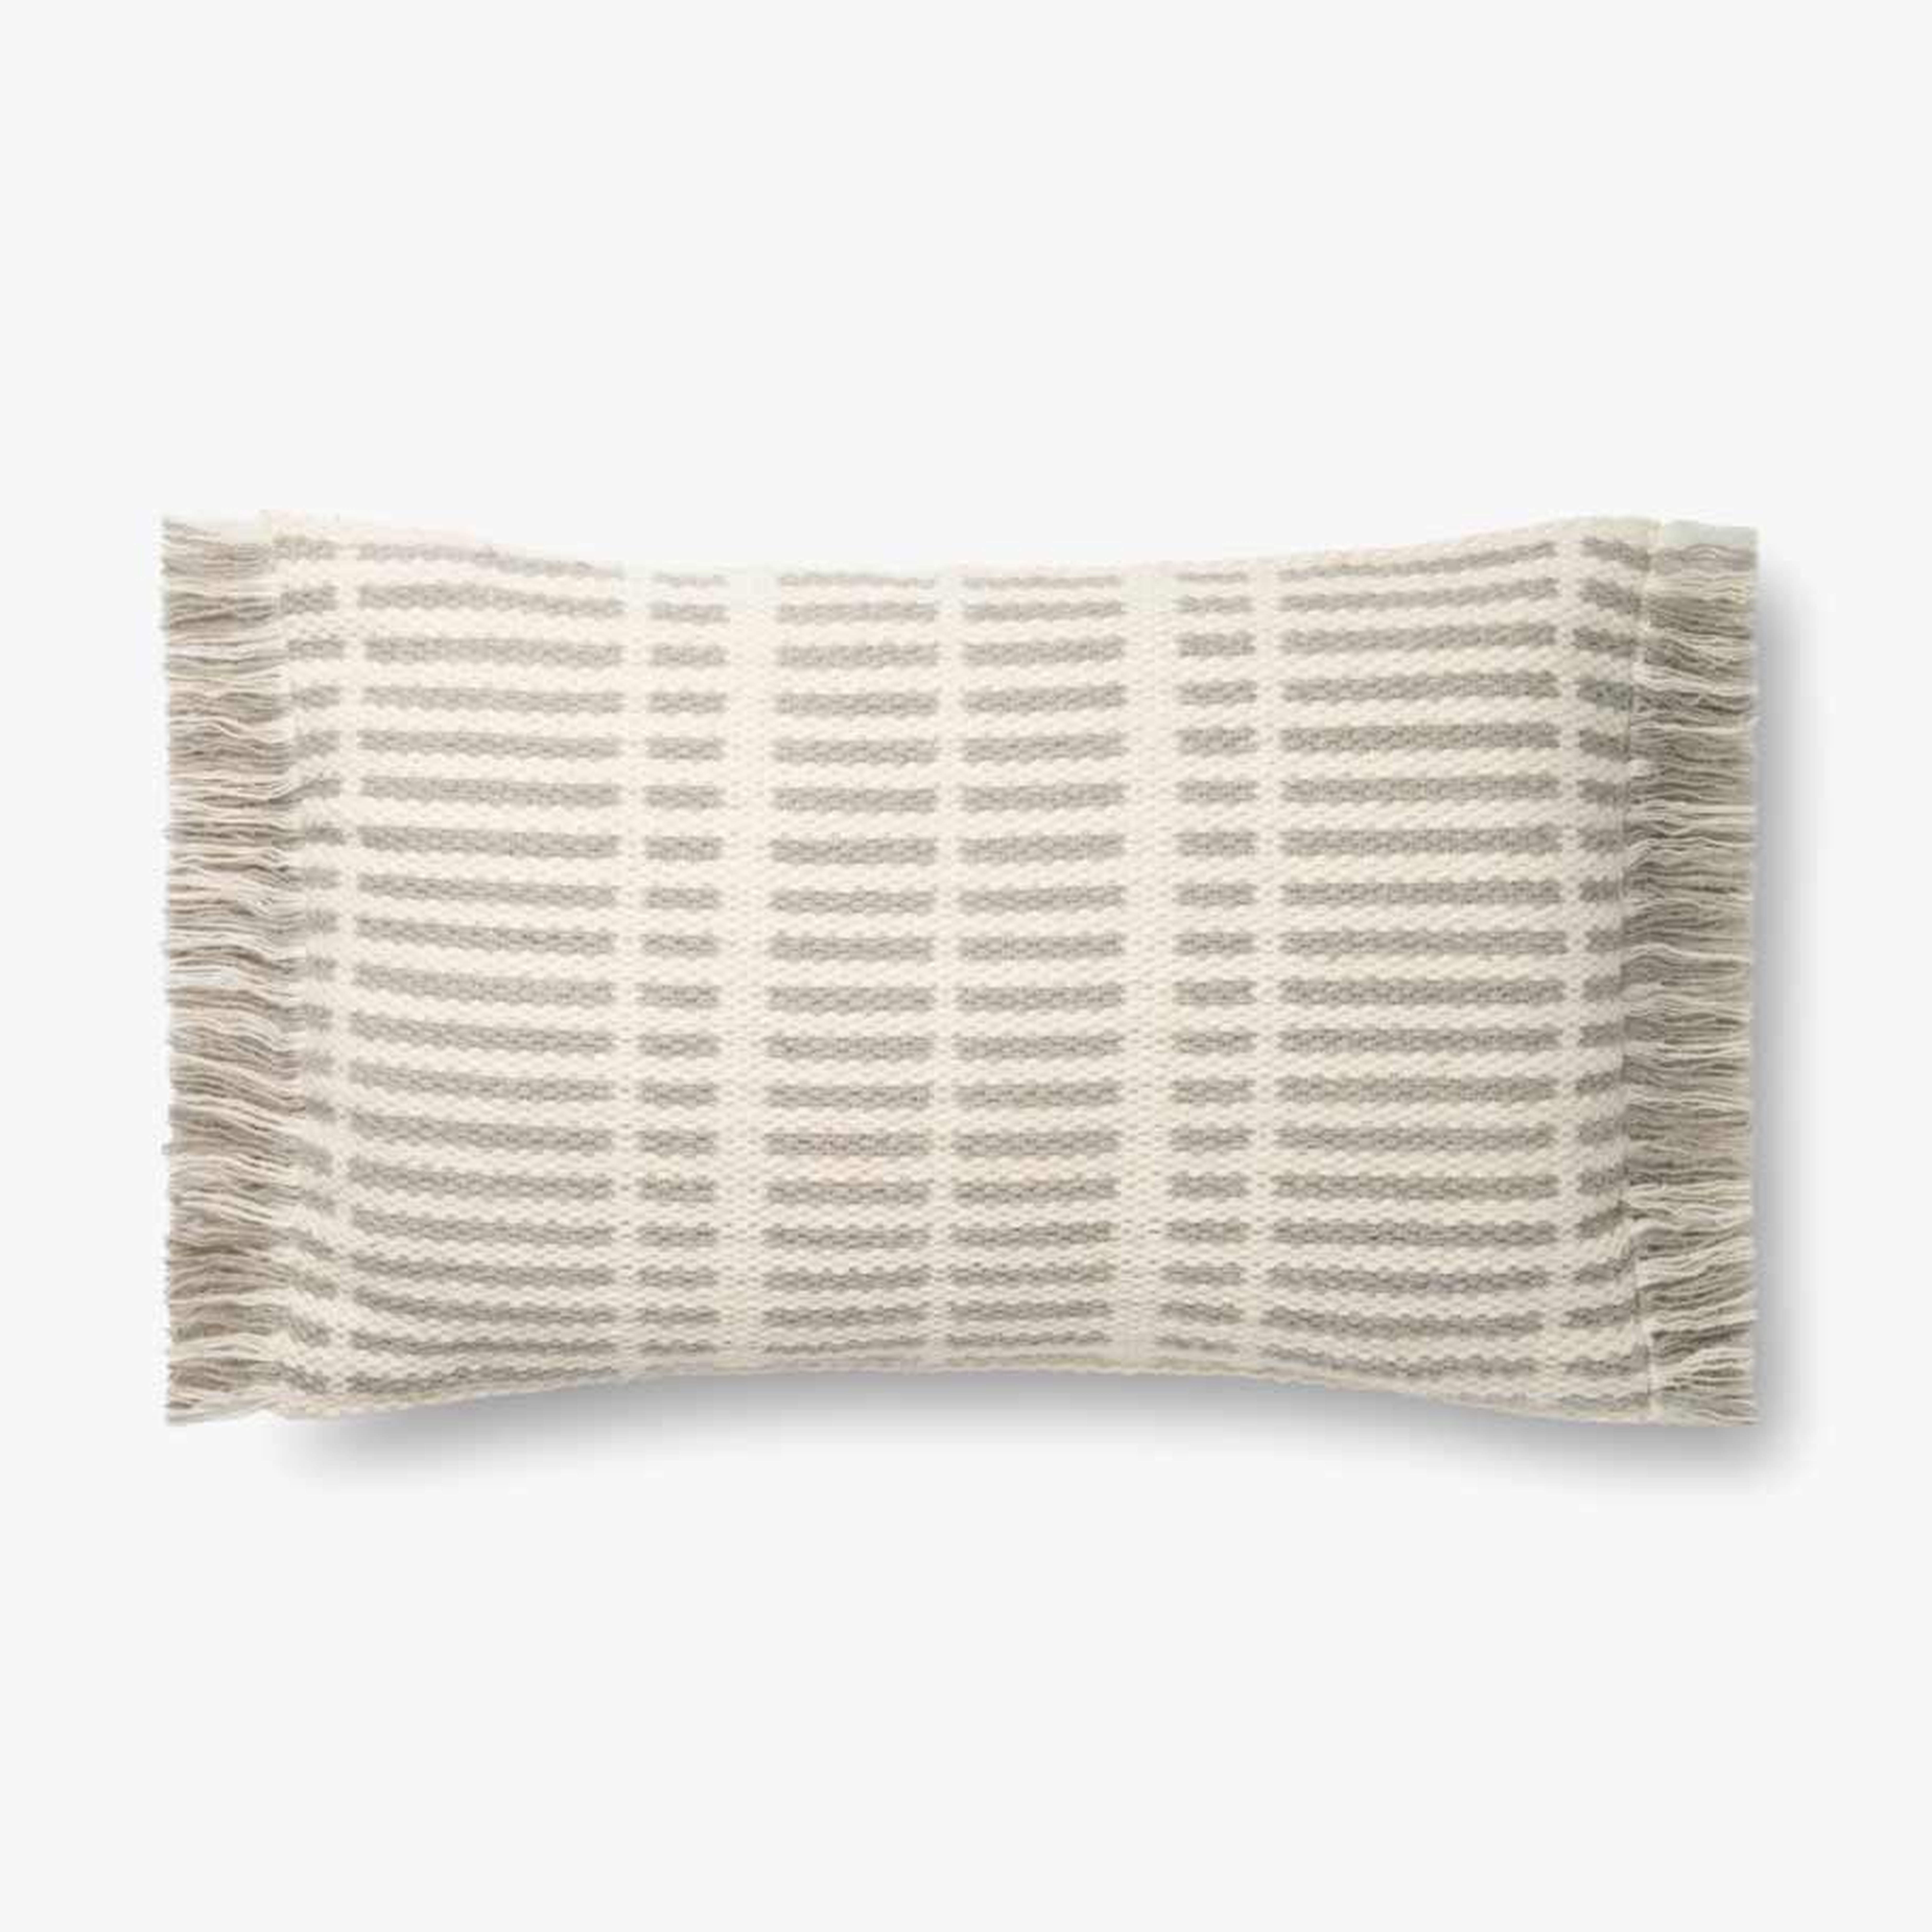 Sticks & Stones Lumbar Pillow, Gray, 26" x 16" - Magnolia Home by Joana Gaines Crafted by Loloi Rugs